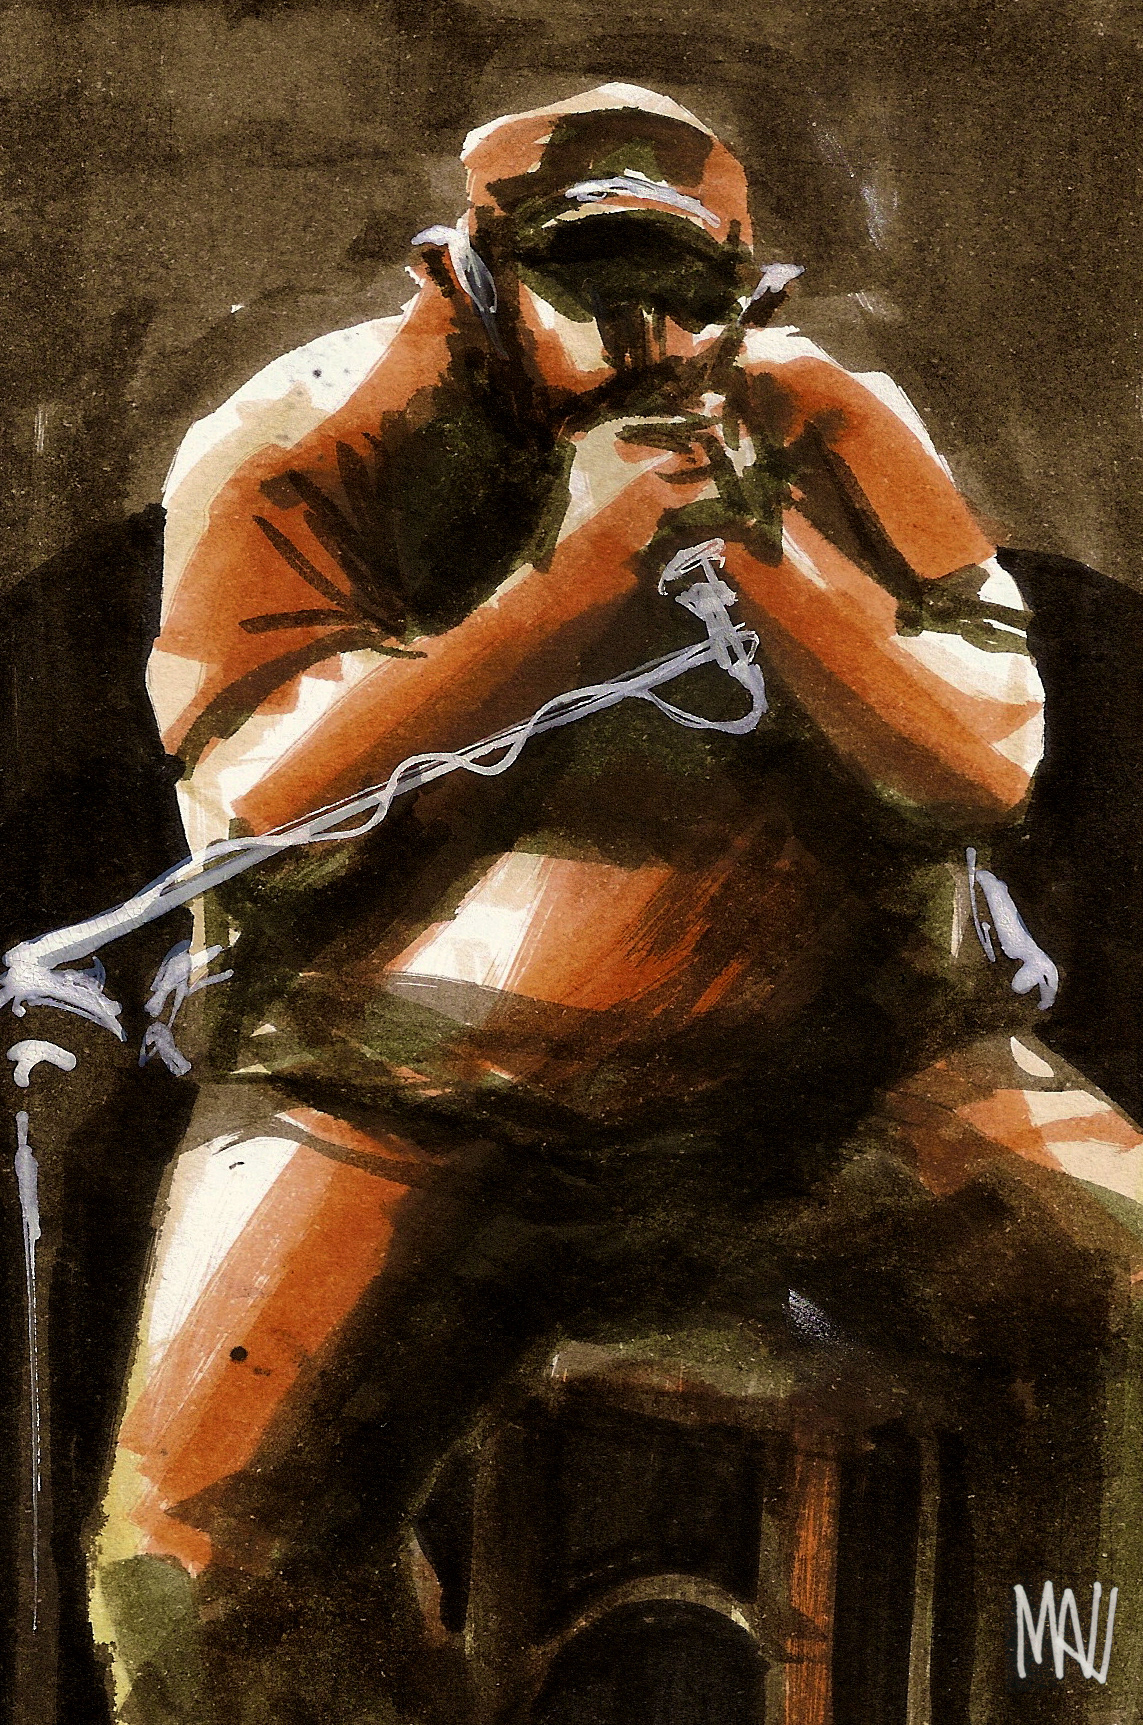 sketch markers live jazz sketches